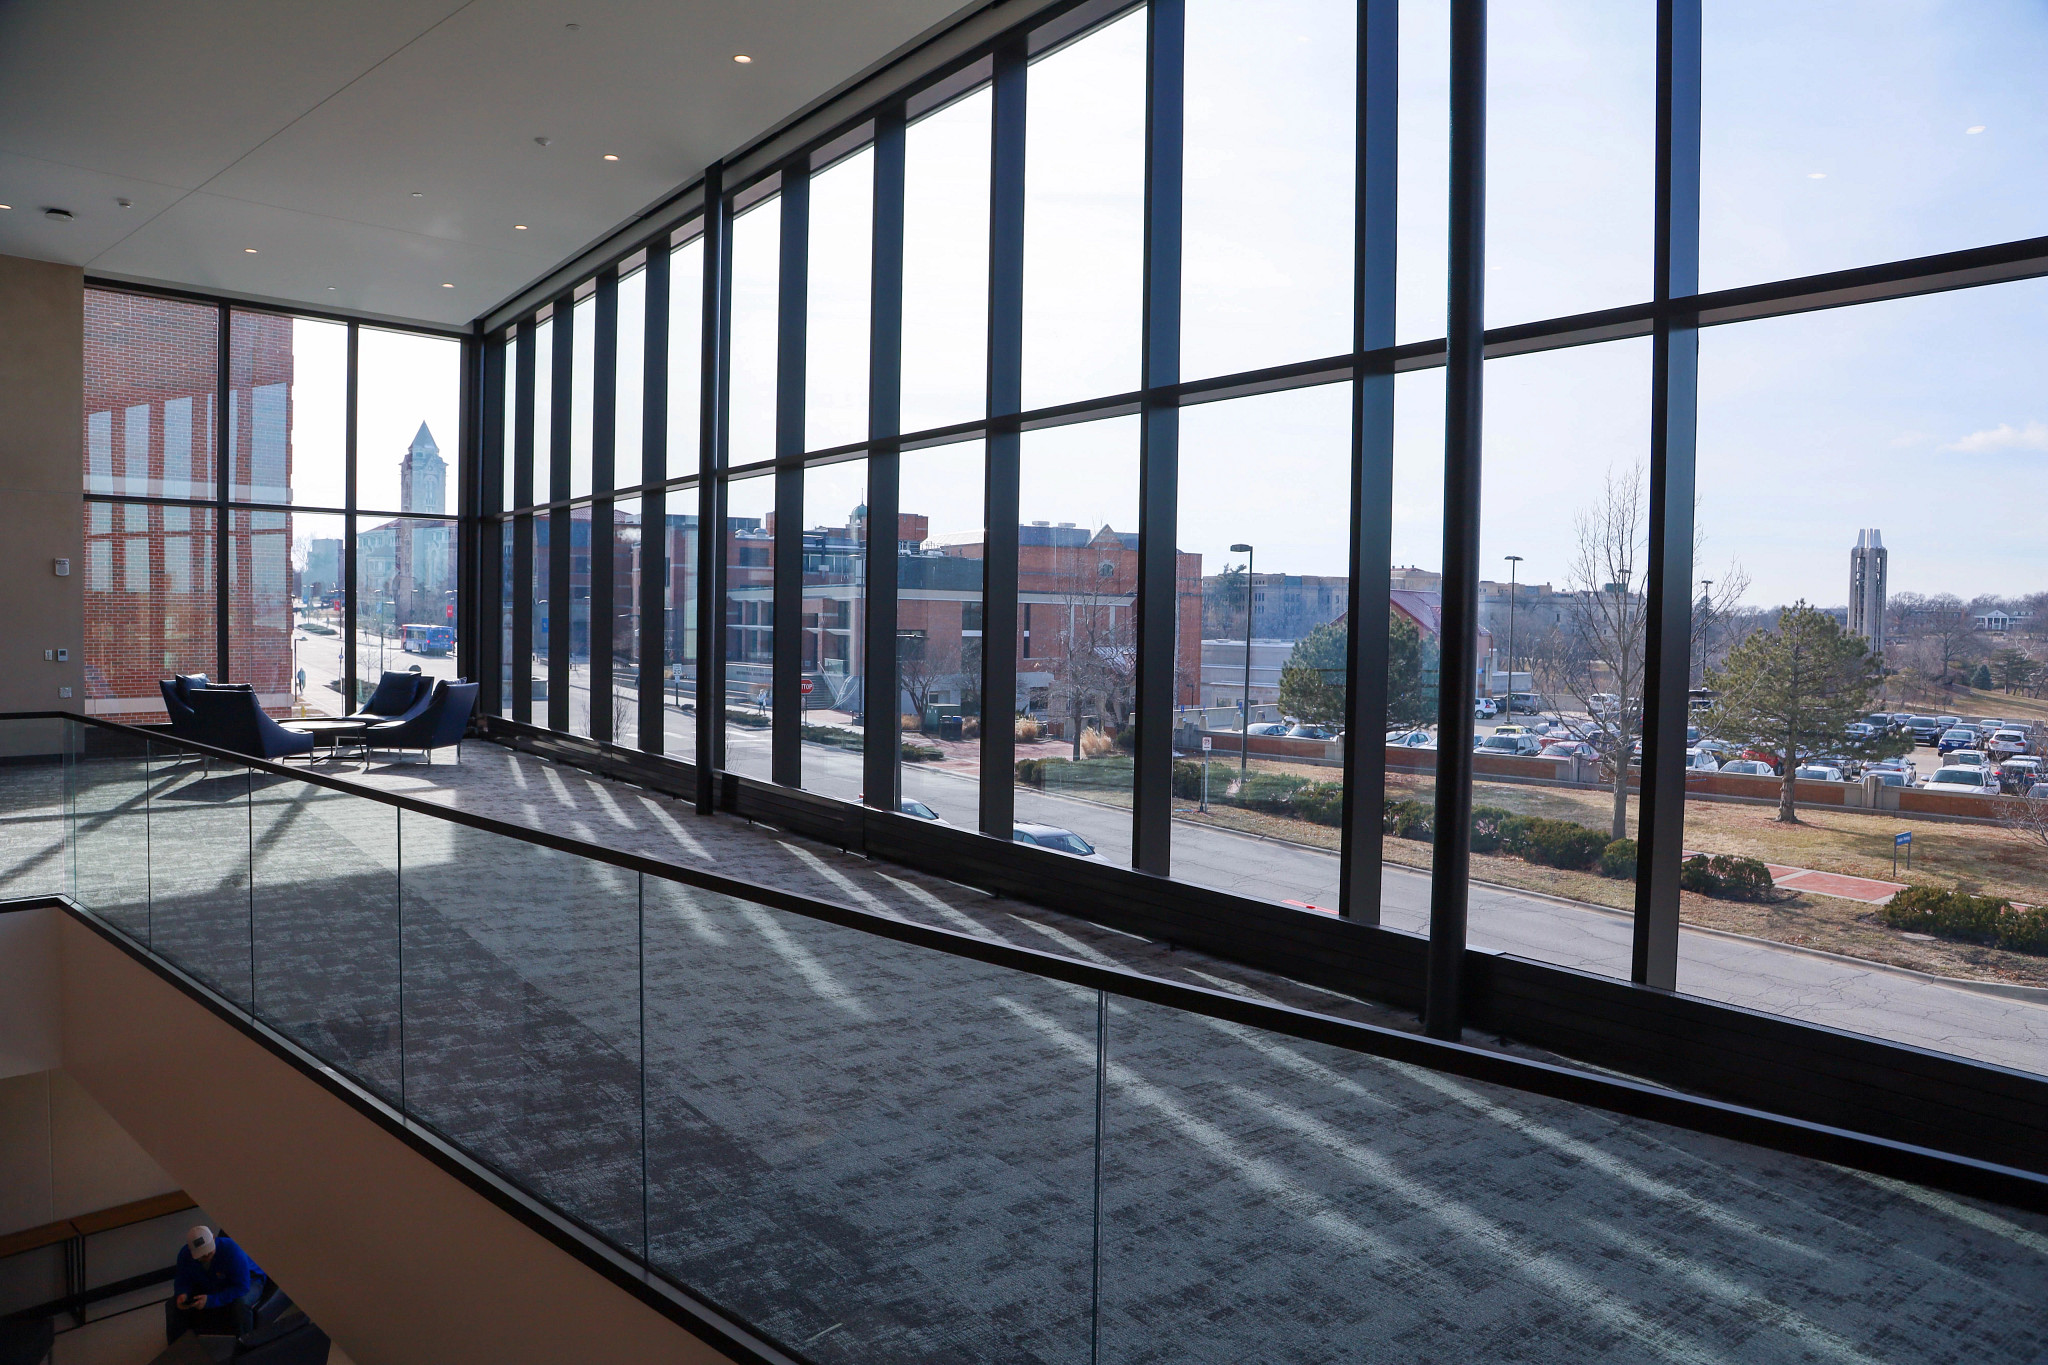 Carpeted, second-floor lobby with view of KU campus, through the window.